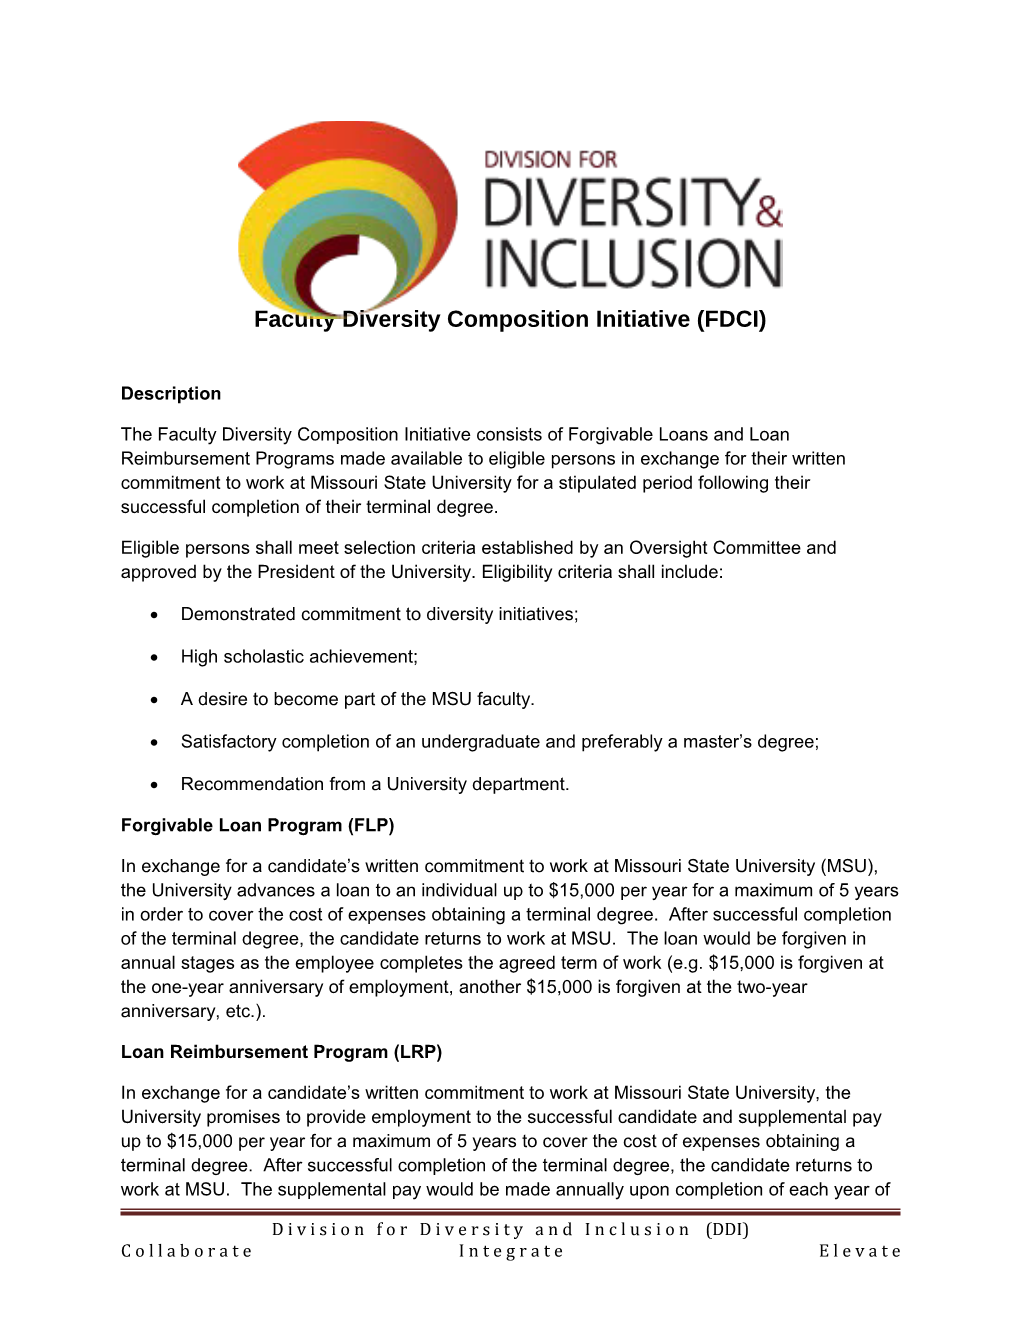 Faculty Diversity Composition Initiative (FDCI) s1